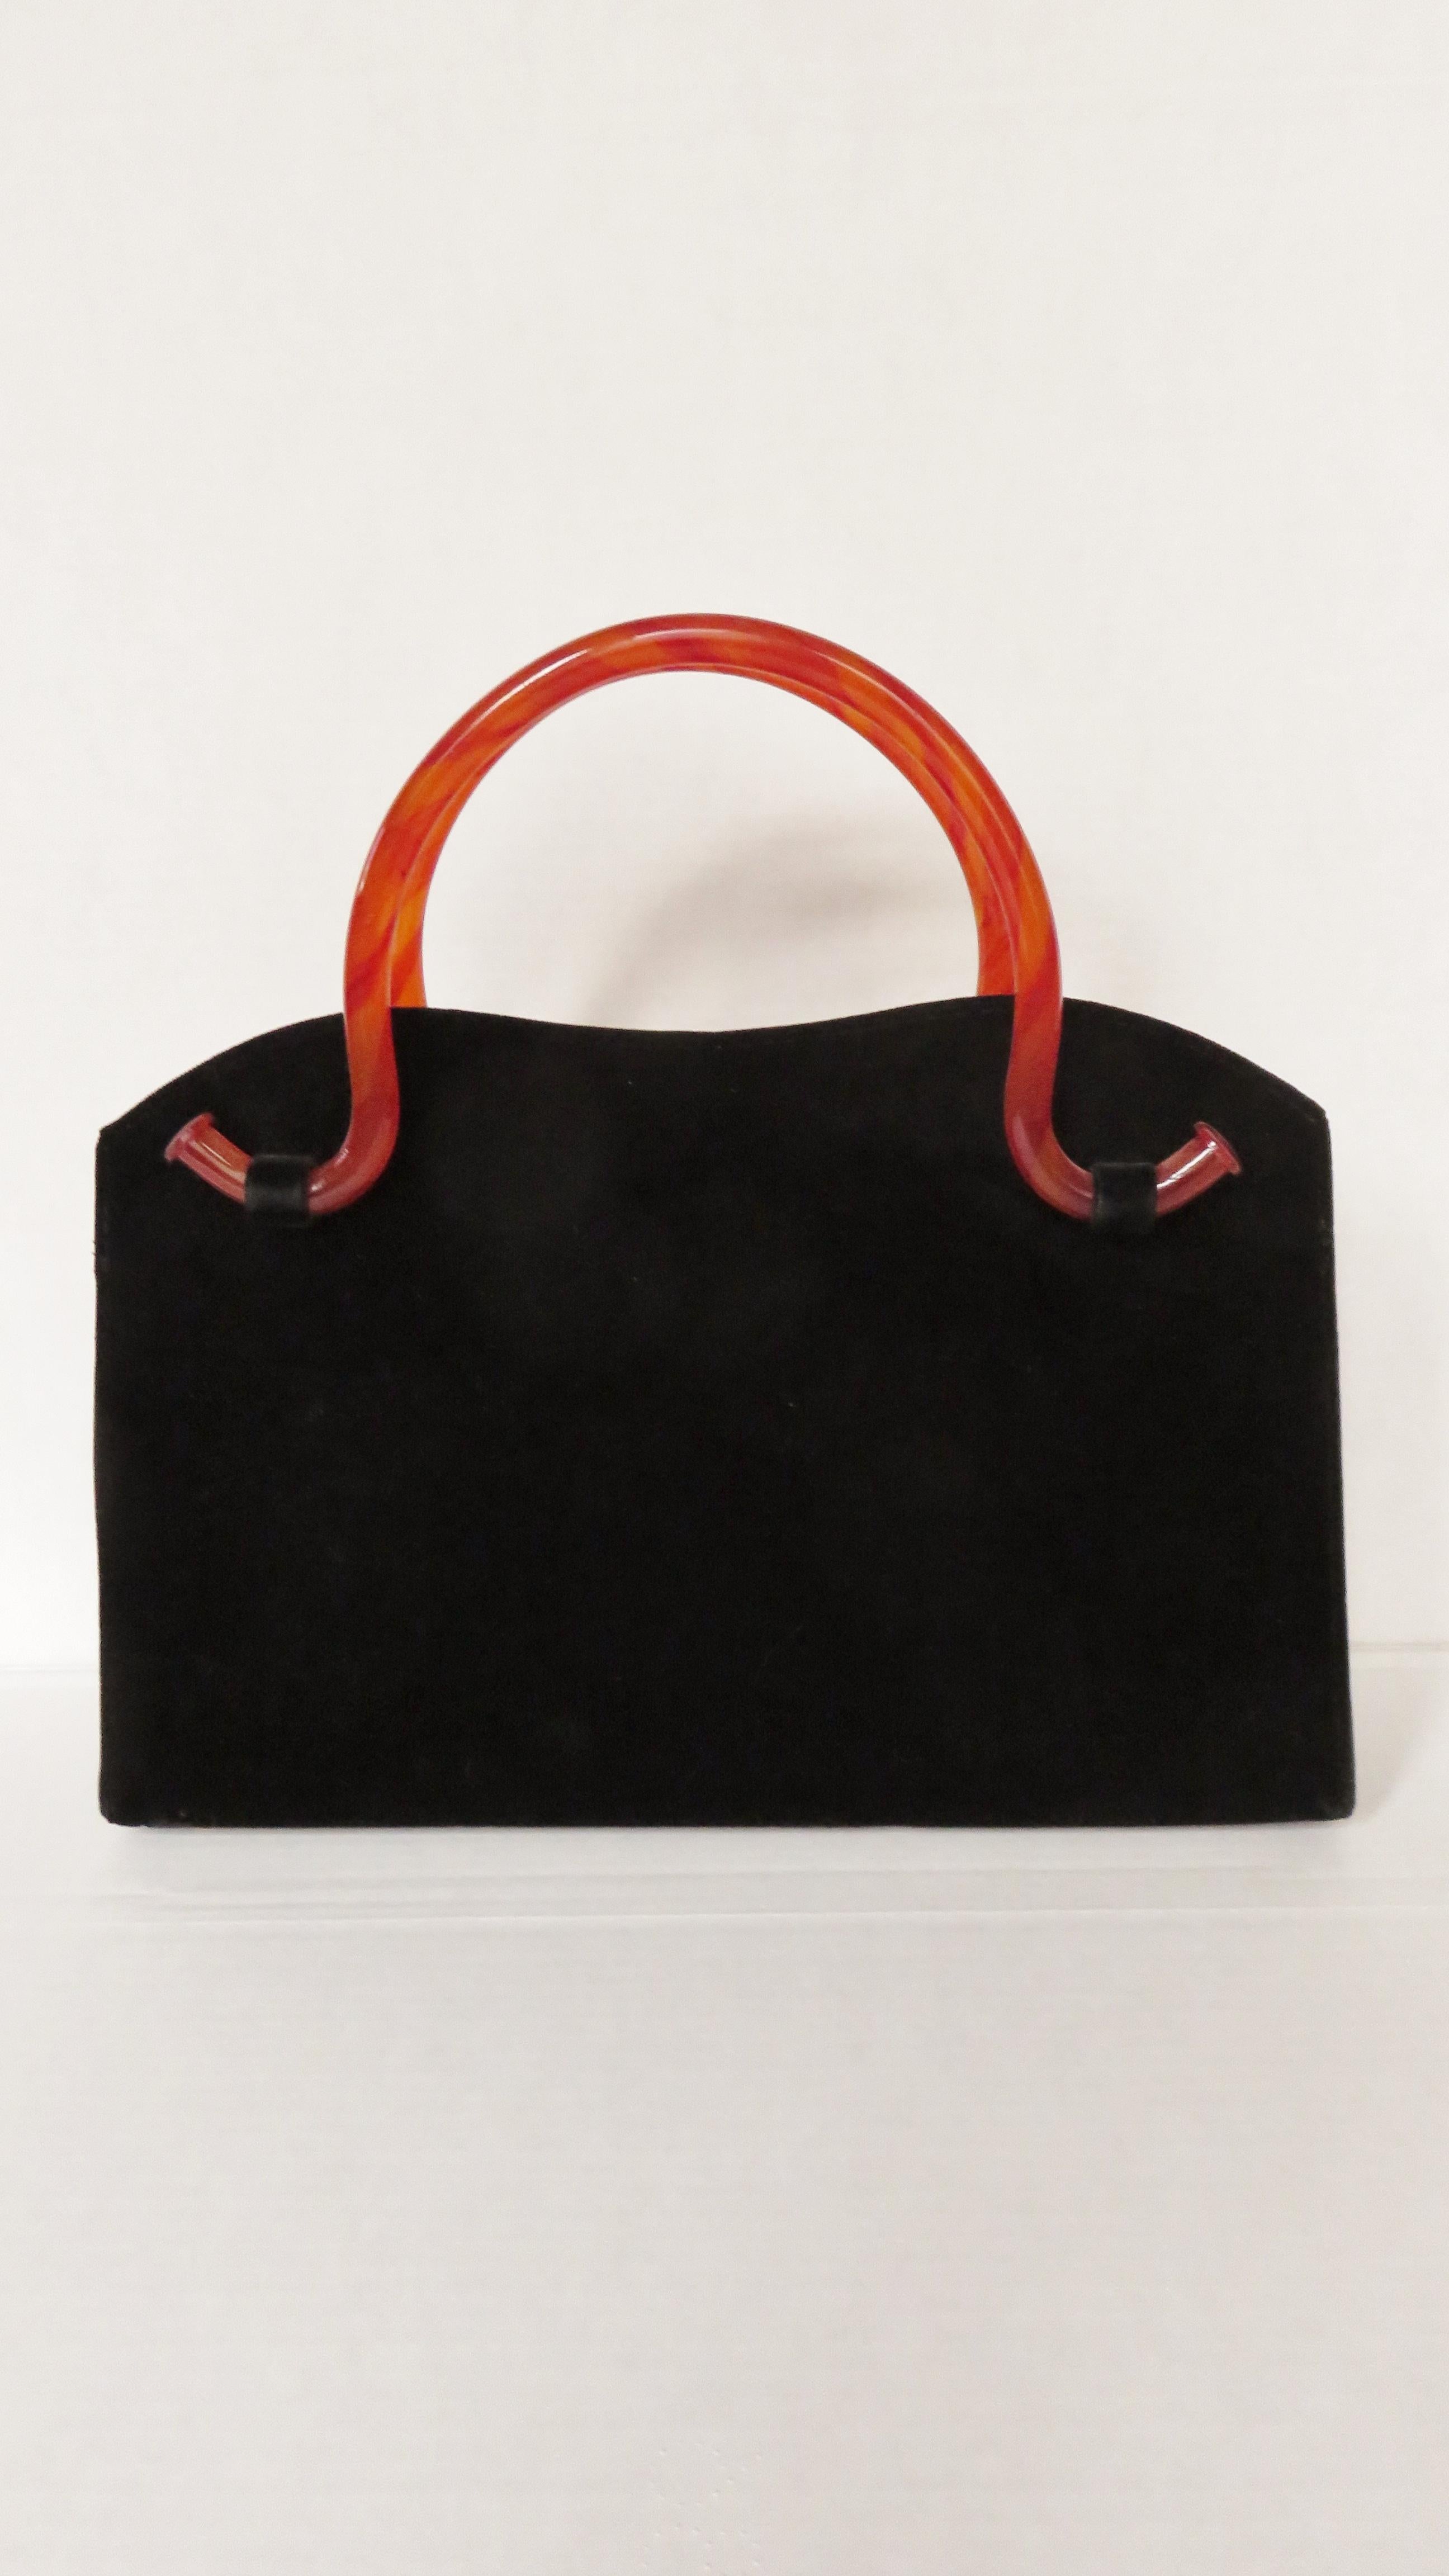 A gorgeous rich black silk velvet handbag with rounded deep orange Bakelite top handles.  It has a gently curved top and gold clasp closure. The bag is lined in black silk with 2 Inside pockets, one zippered.

Height  9